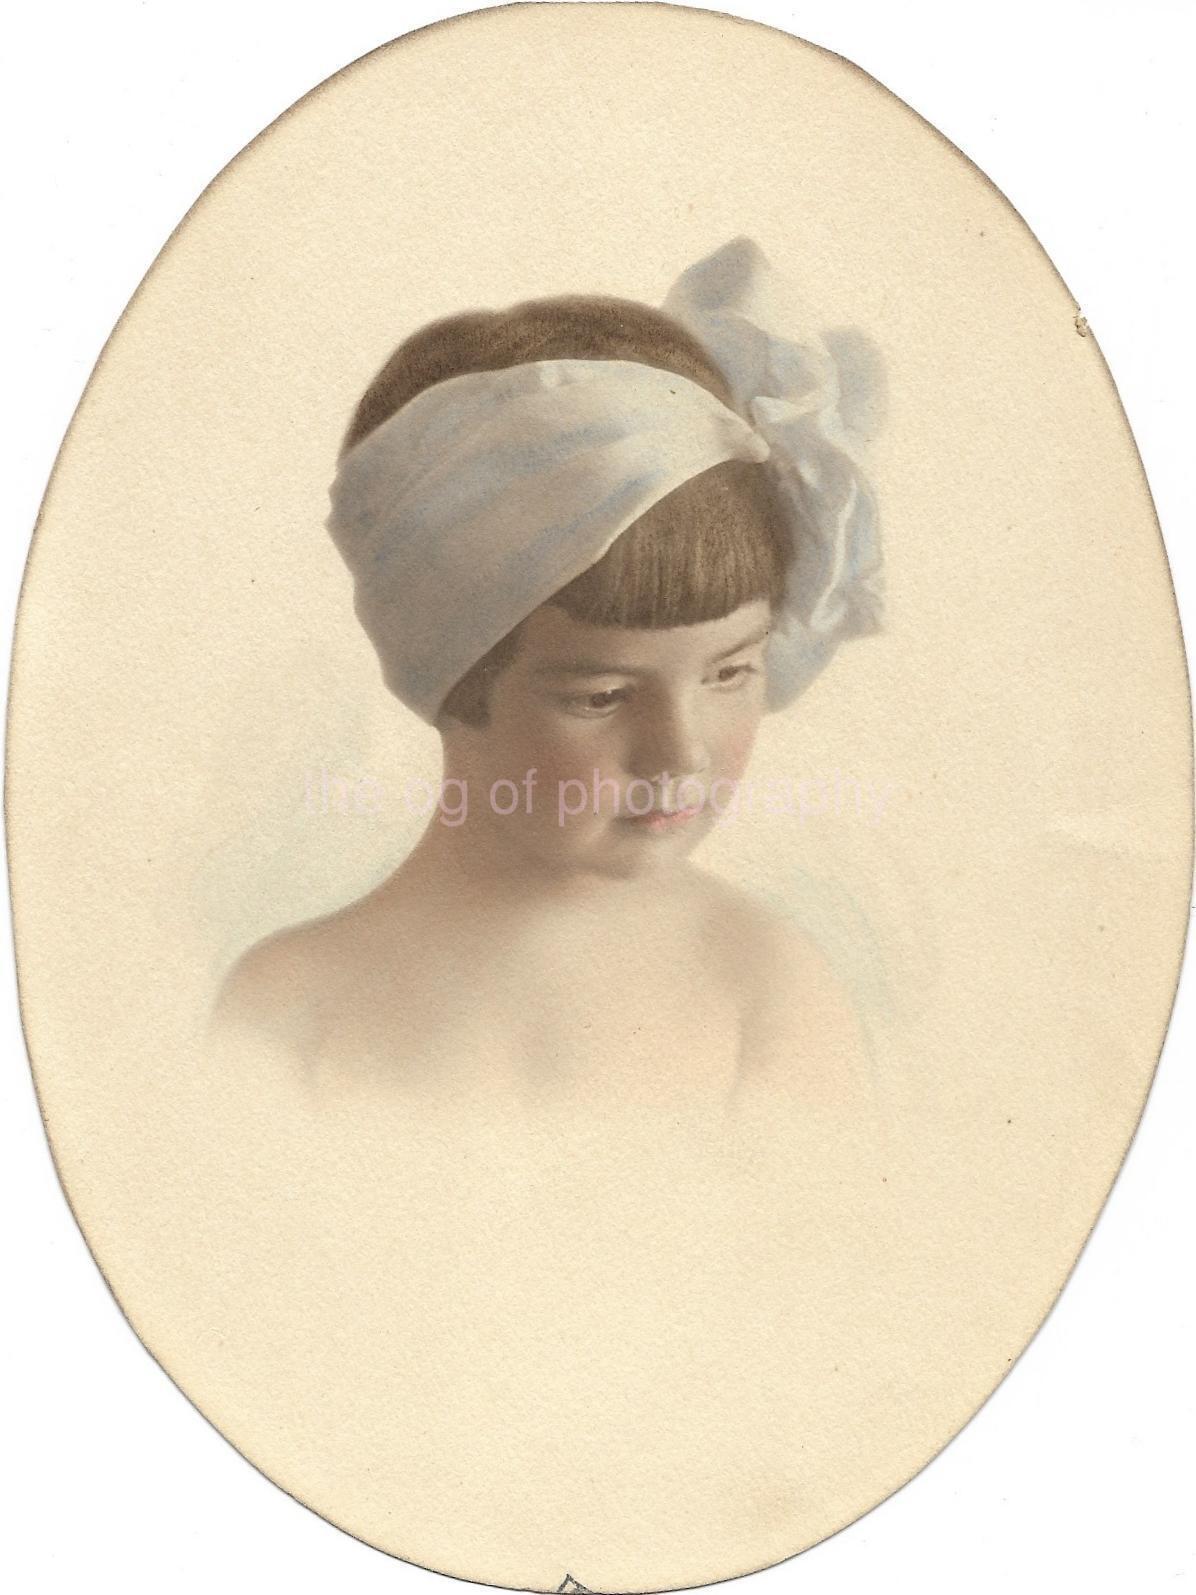 8X6 YOUNG GIRL Pretty Portrait ANTIQUE FOUND PHOTO Black And White Old  36 60 X